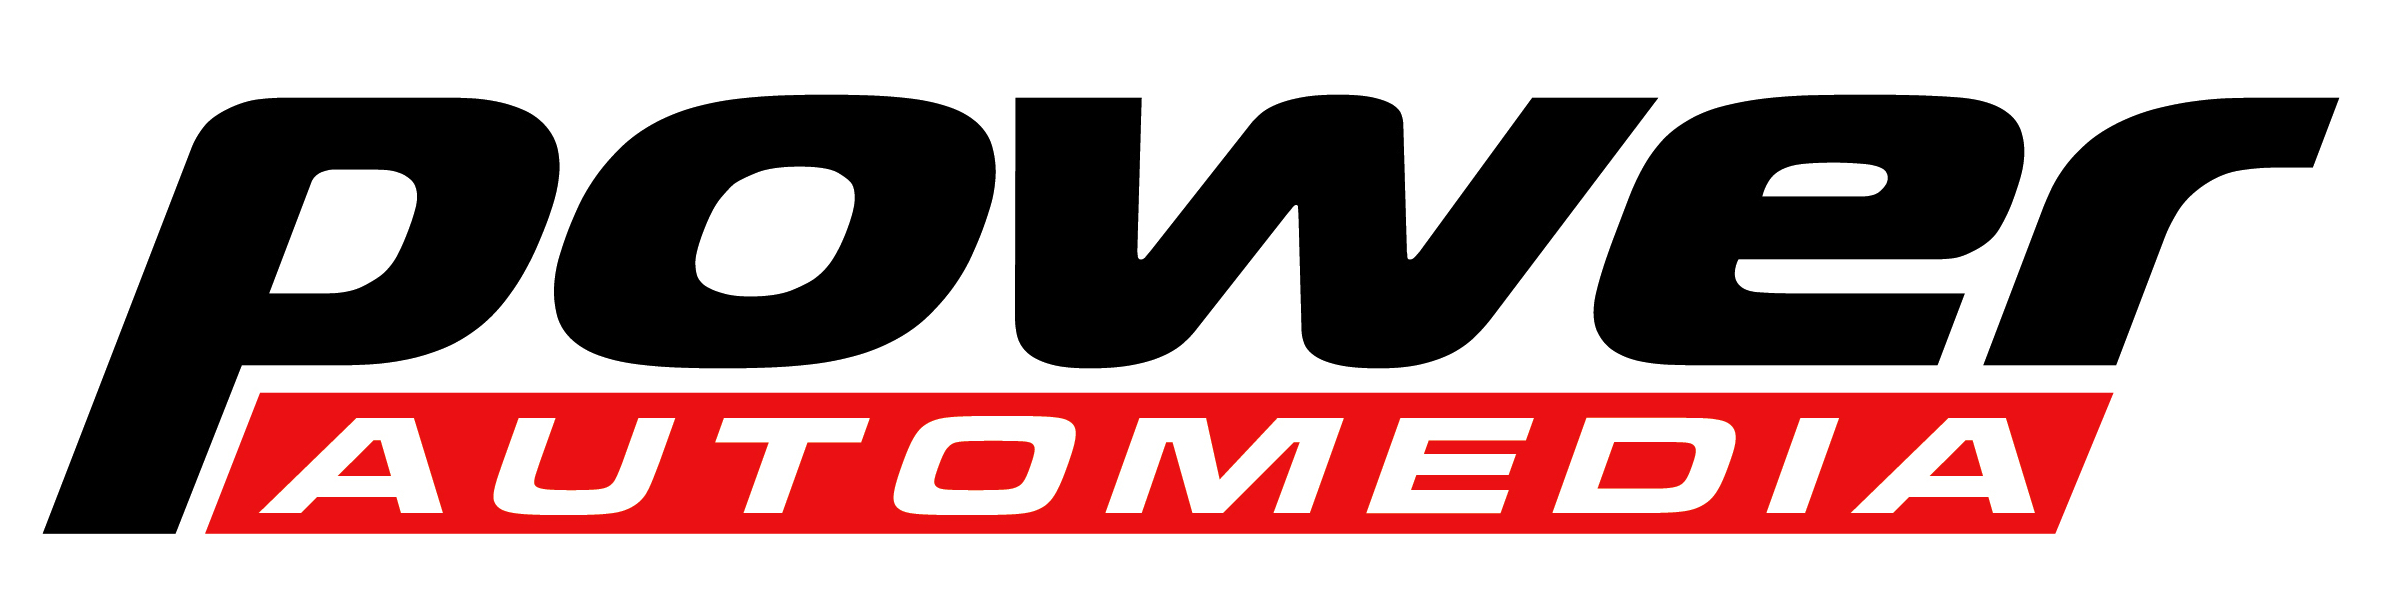 Power Automedia And Goodguys Continue Digital Partnership in 2013